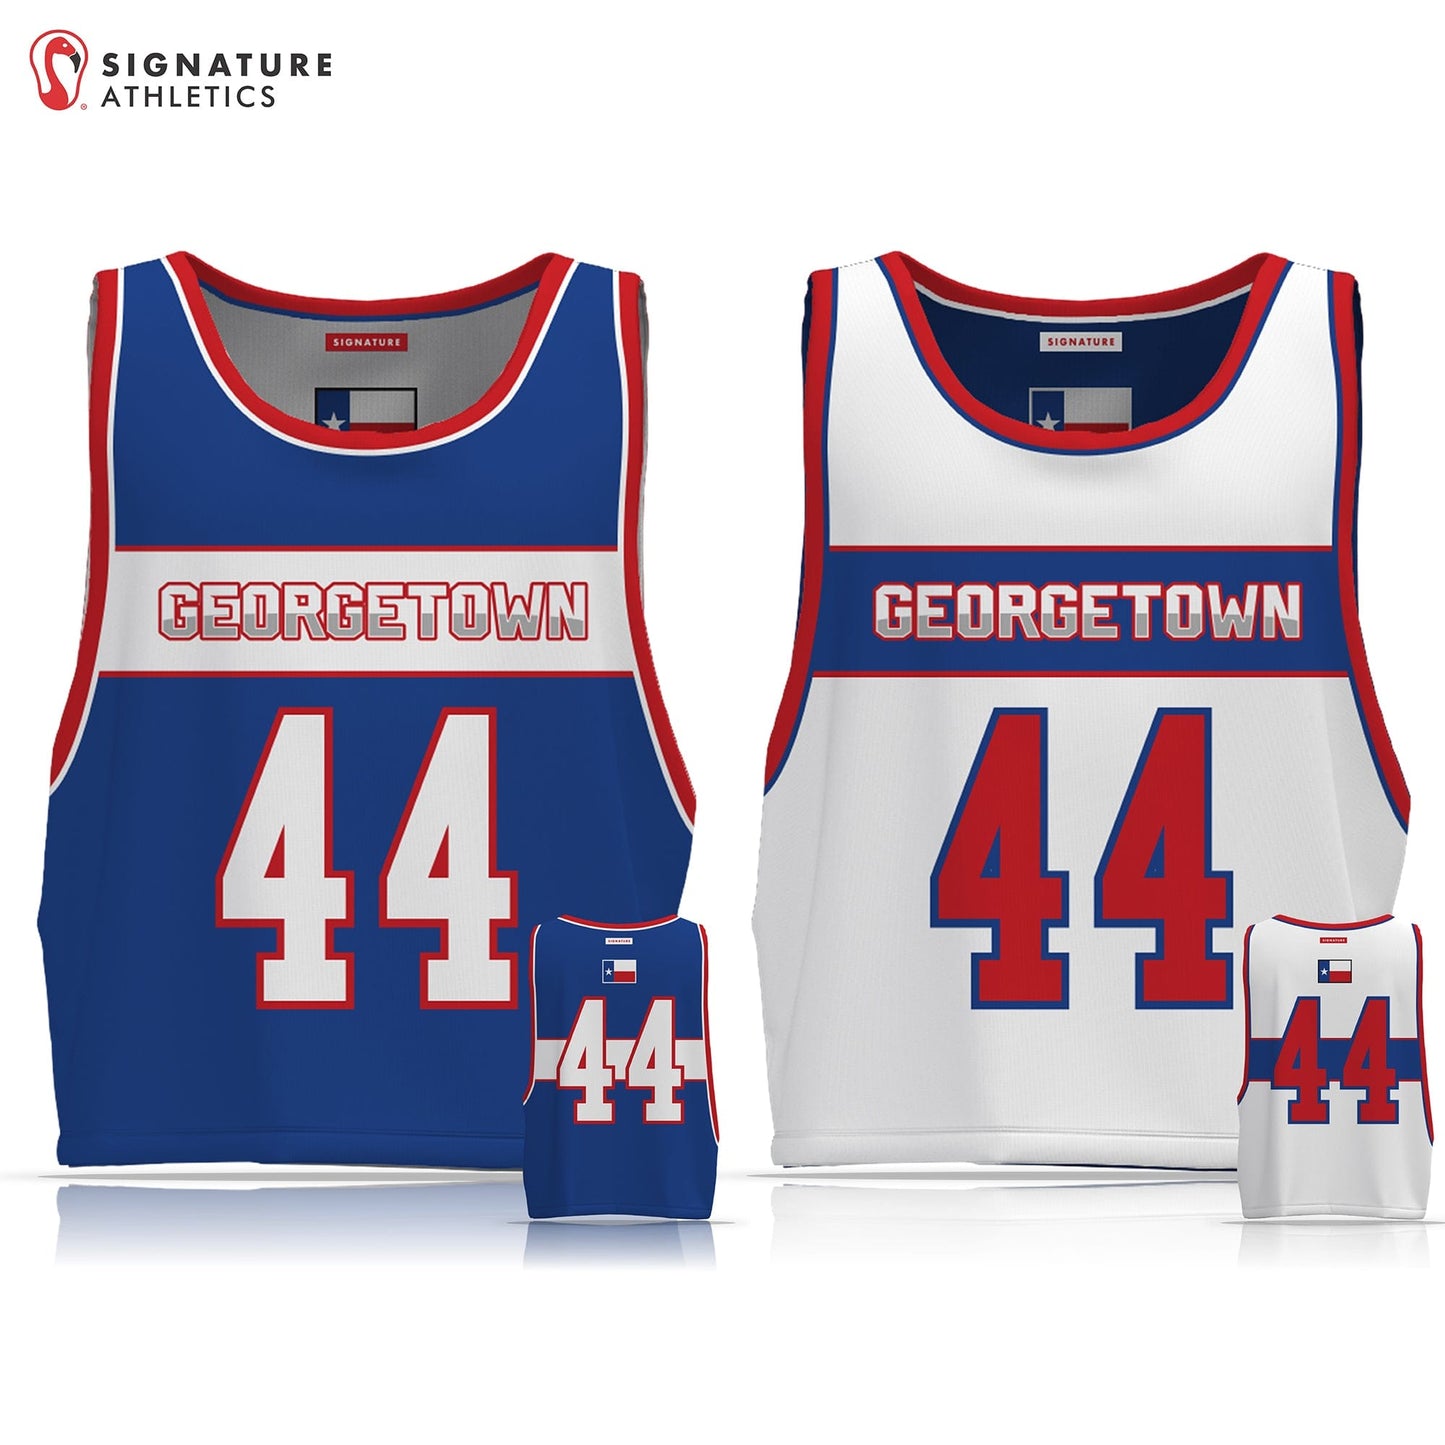 Georgetown Youth Lacrosse Men's Player Reversible Game Pinnie: 5th/6th (Juniors) Signature Lacrosse